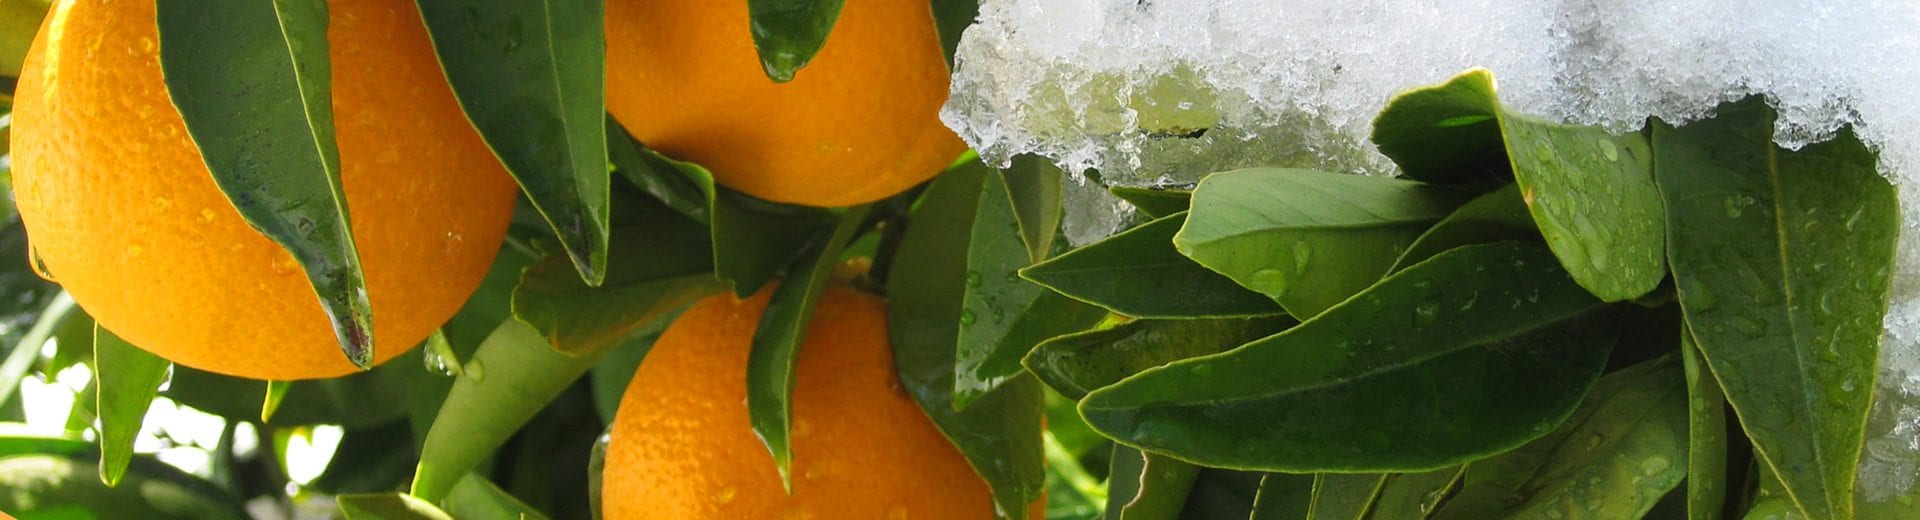 Give a Delicious Gift and Enjoy our Winter Citrus all Year Long